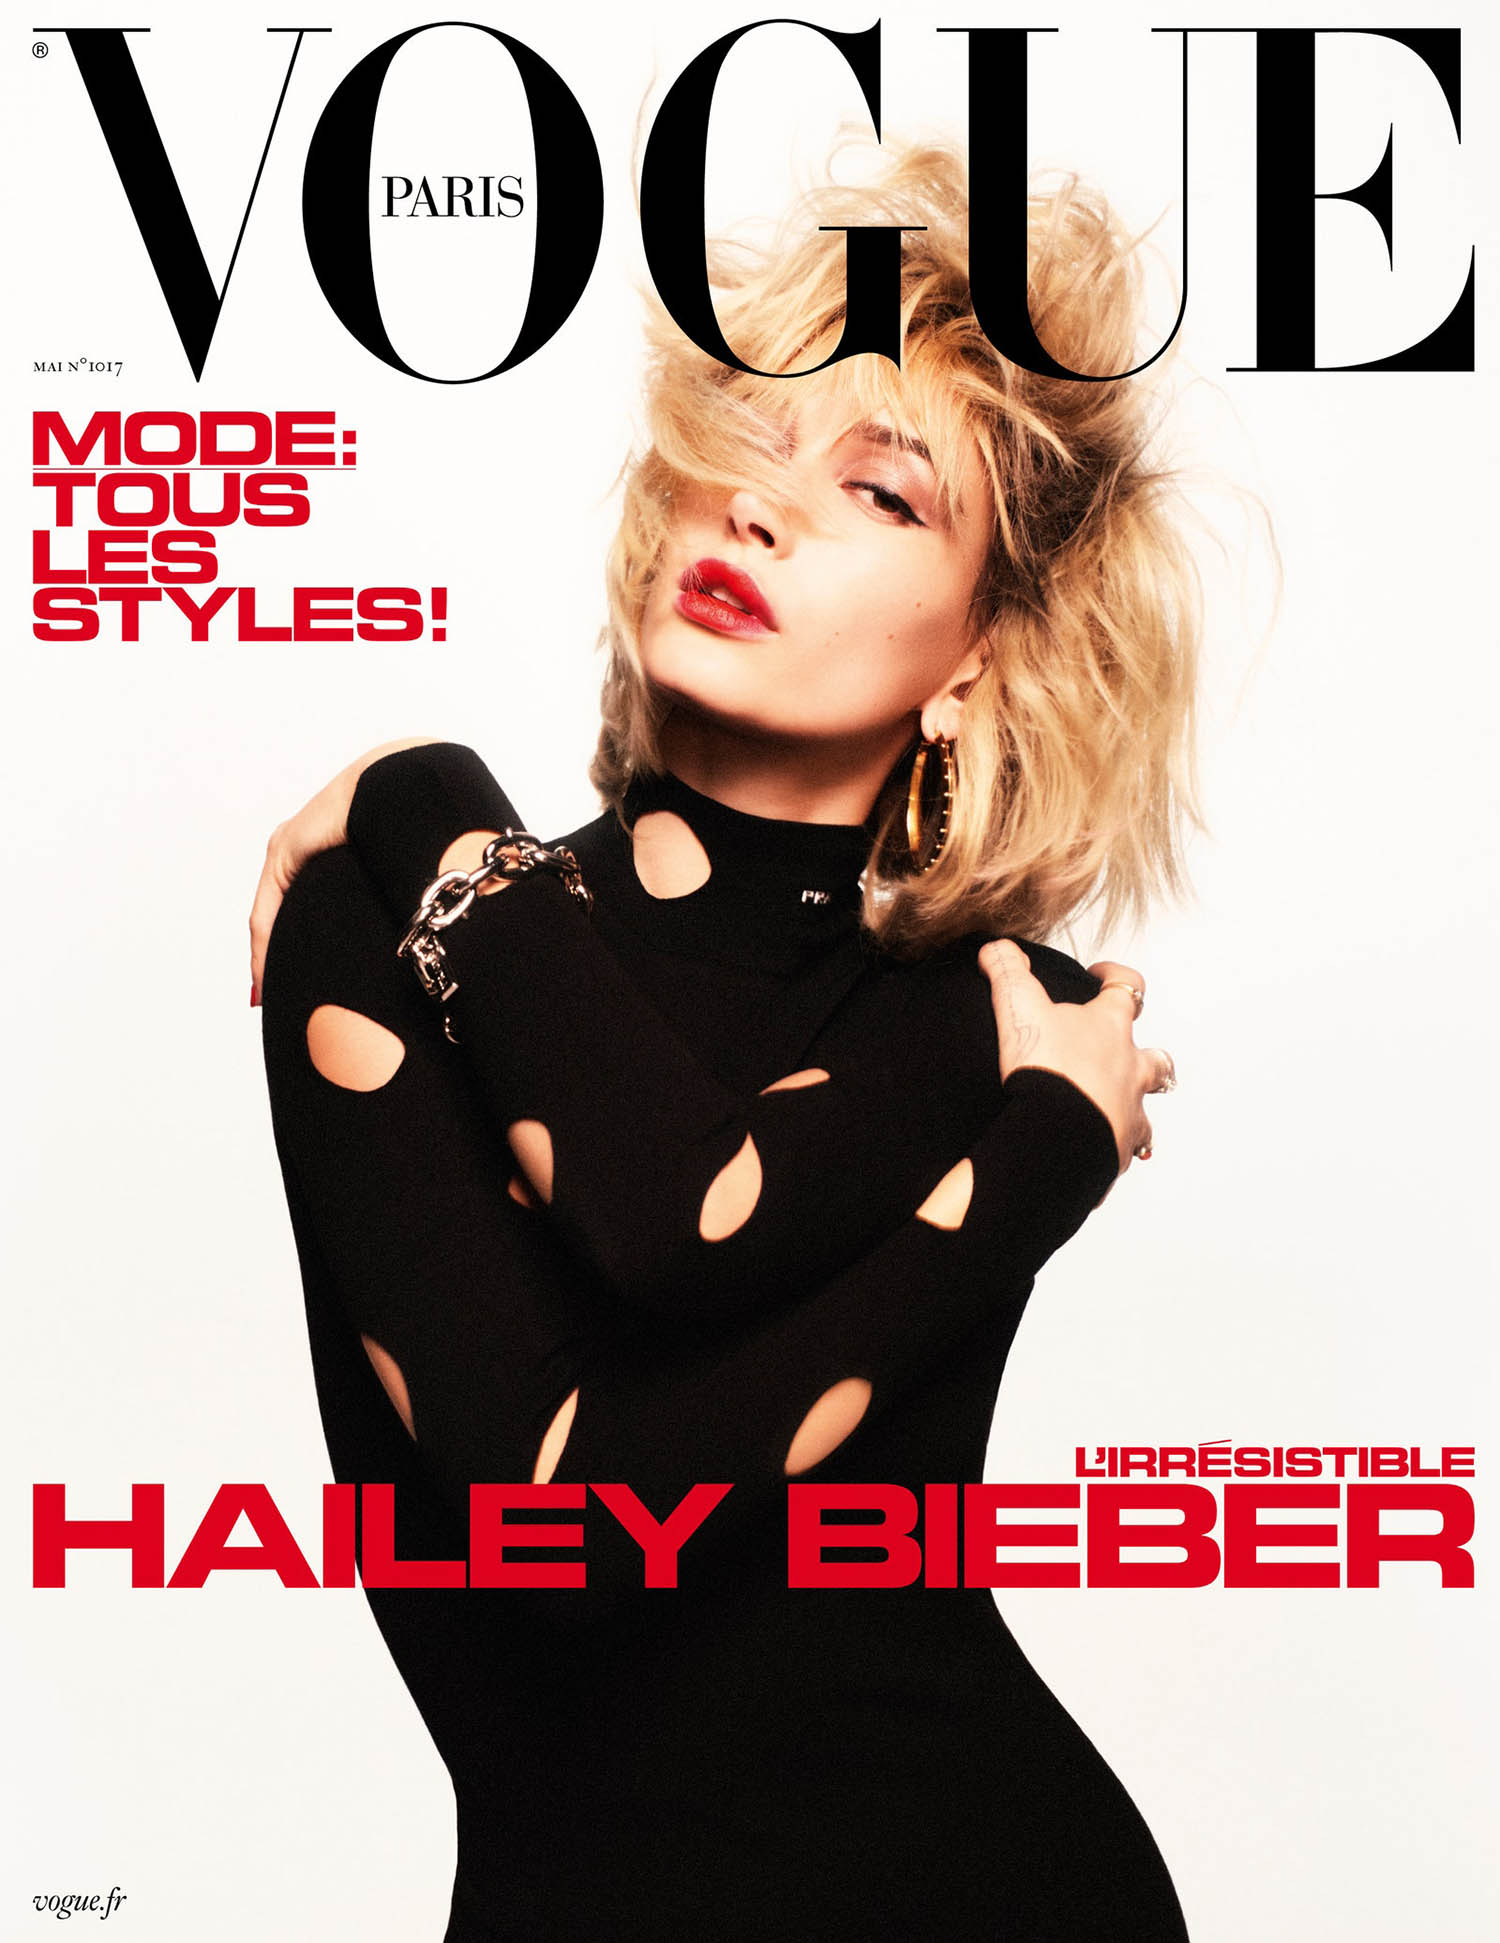 Hailey Bieber covers Vogue Paris May 2021 by David Sims